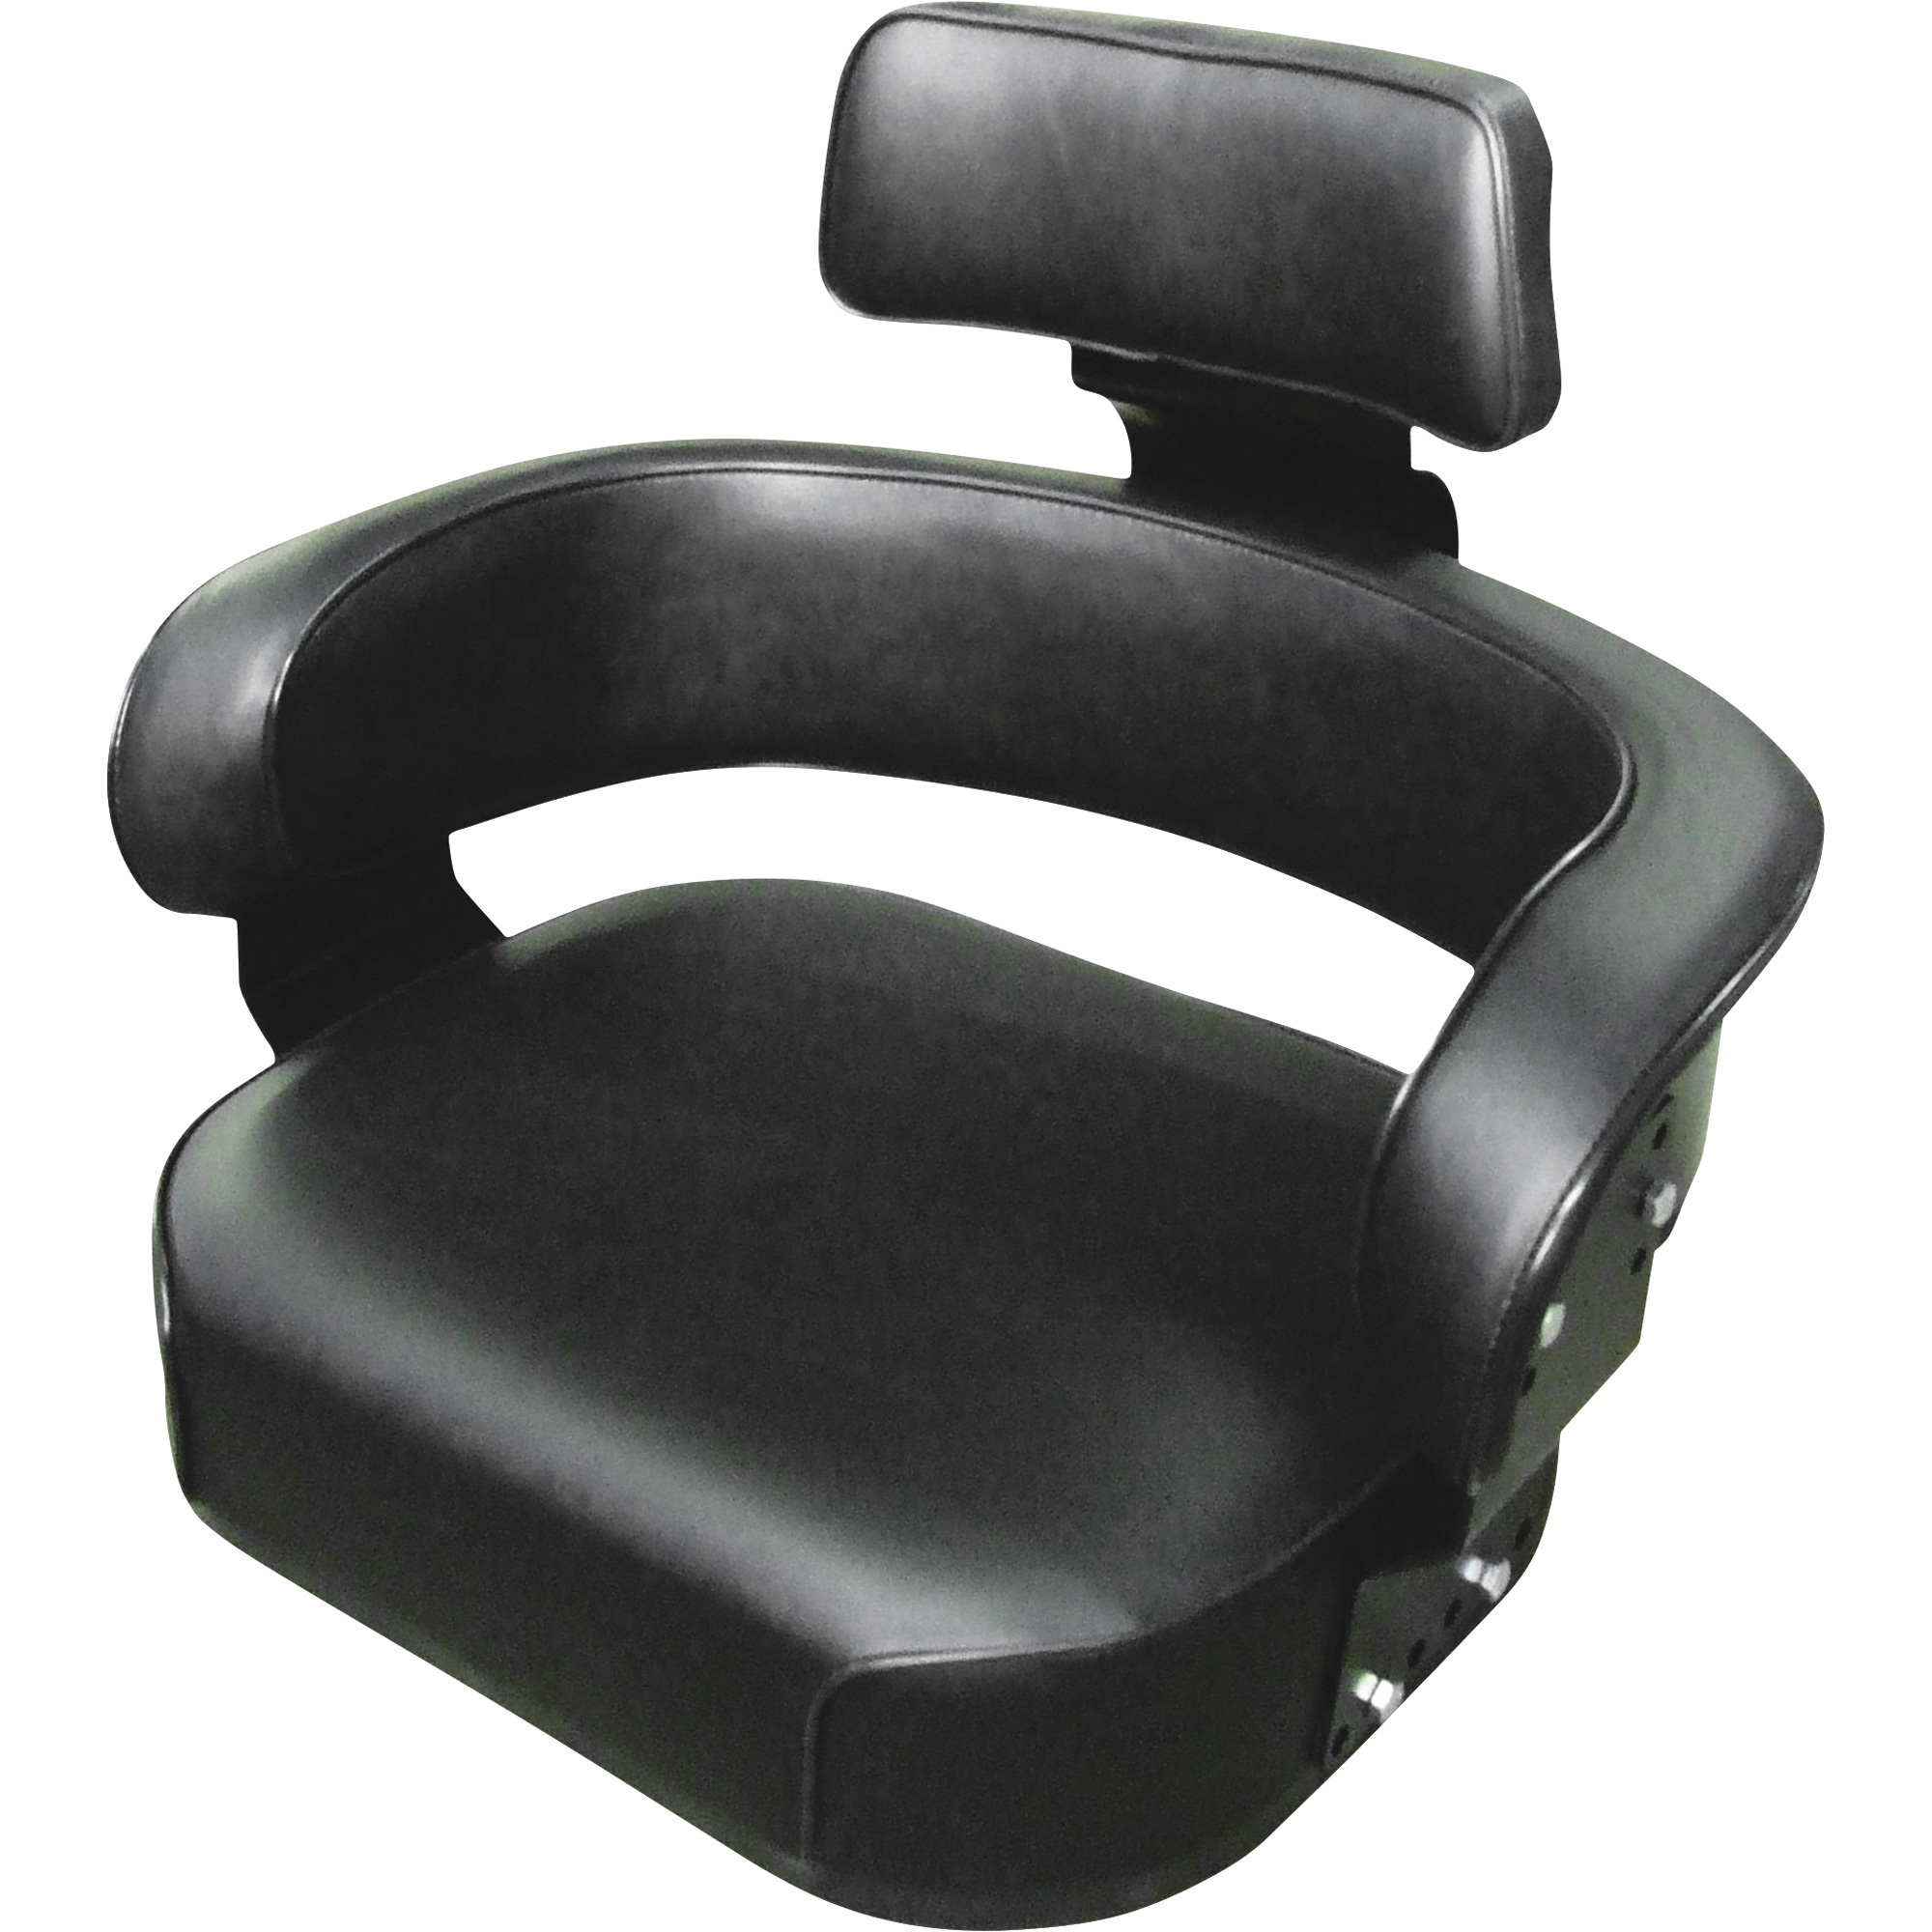 K&M Case Comfort King Tractor Seat Assembly, Replaces 3-Piece Comfort King 30 Series Seat, Black, Model NTE72556054